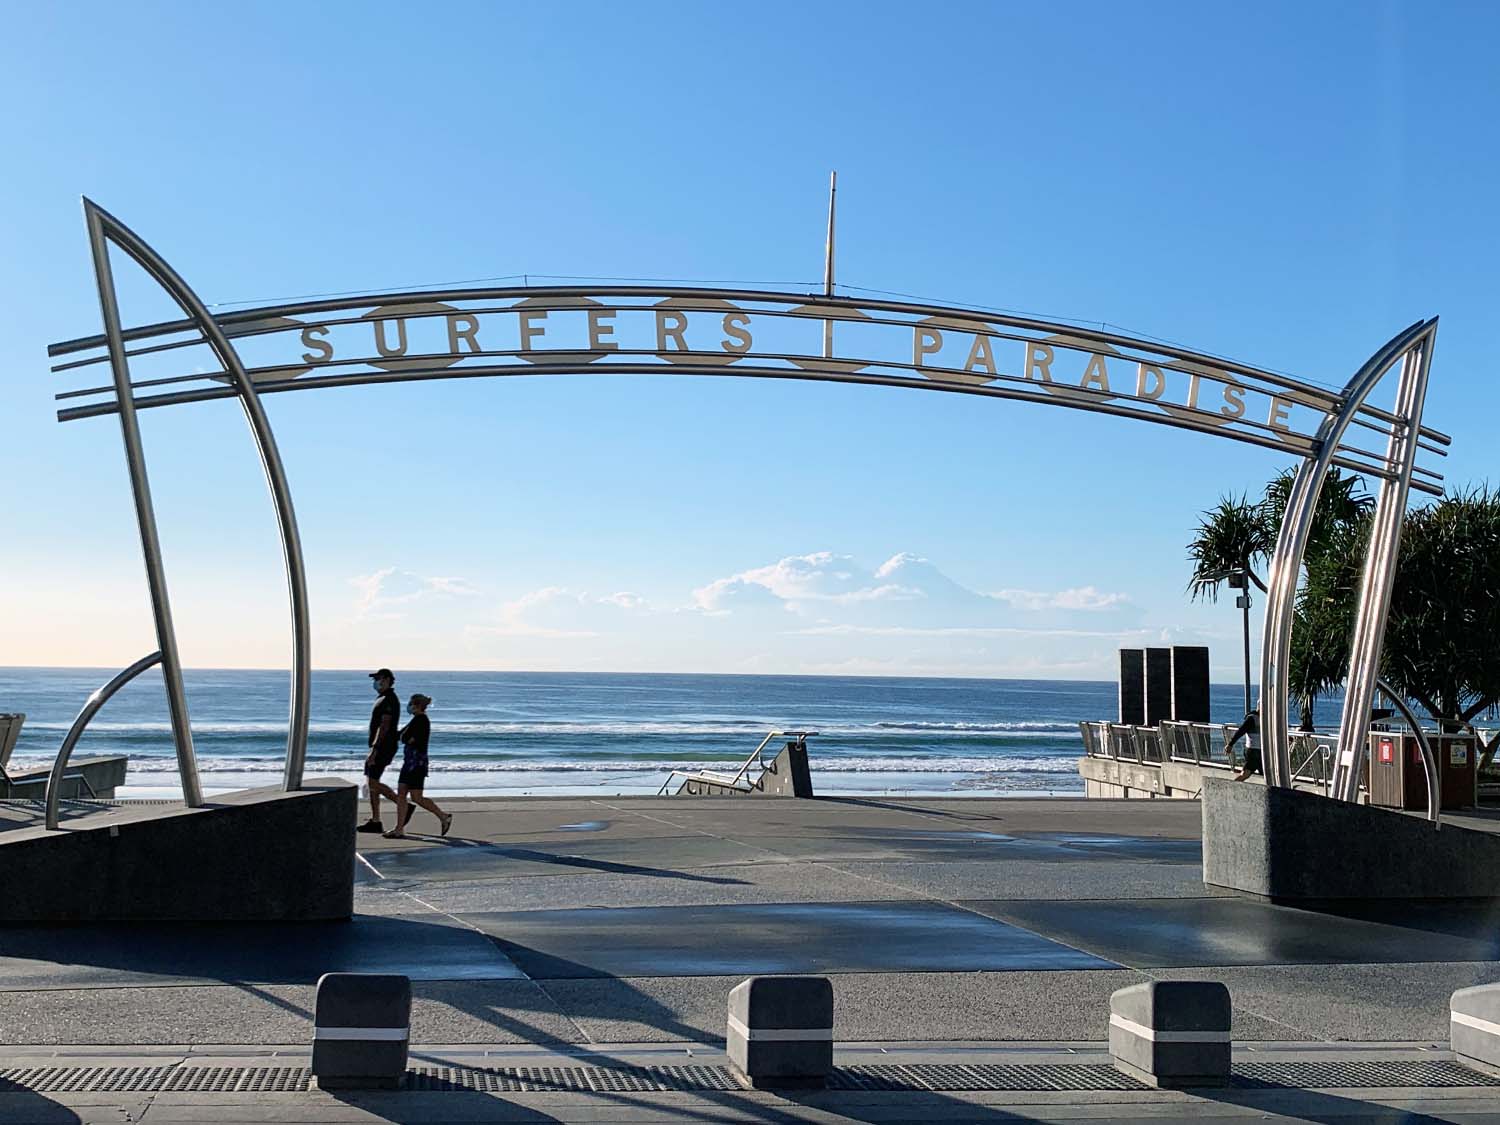 Cleaning outdoor stainless steel, Surfers Paradise sign